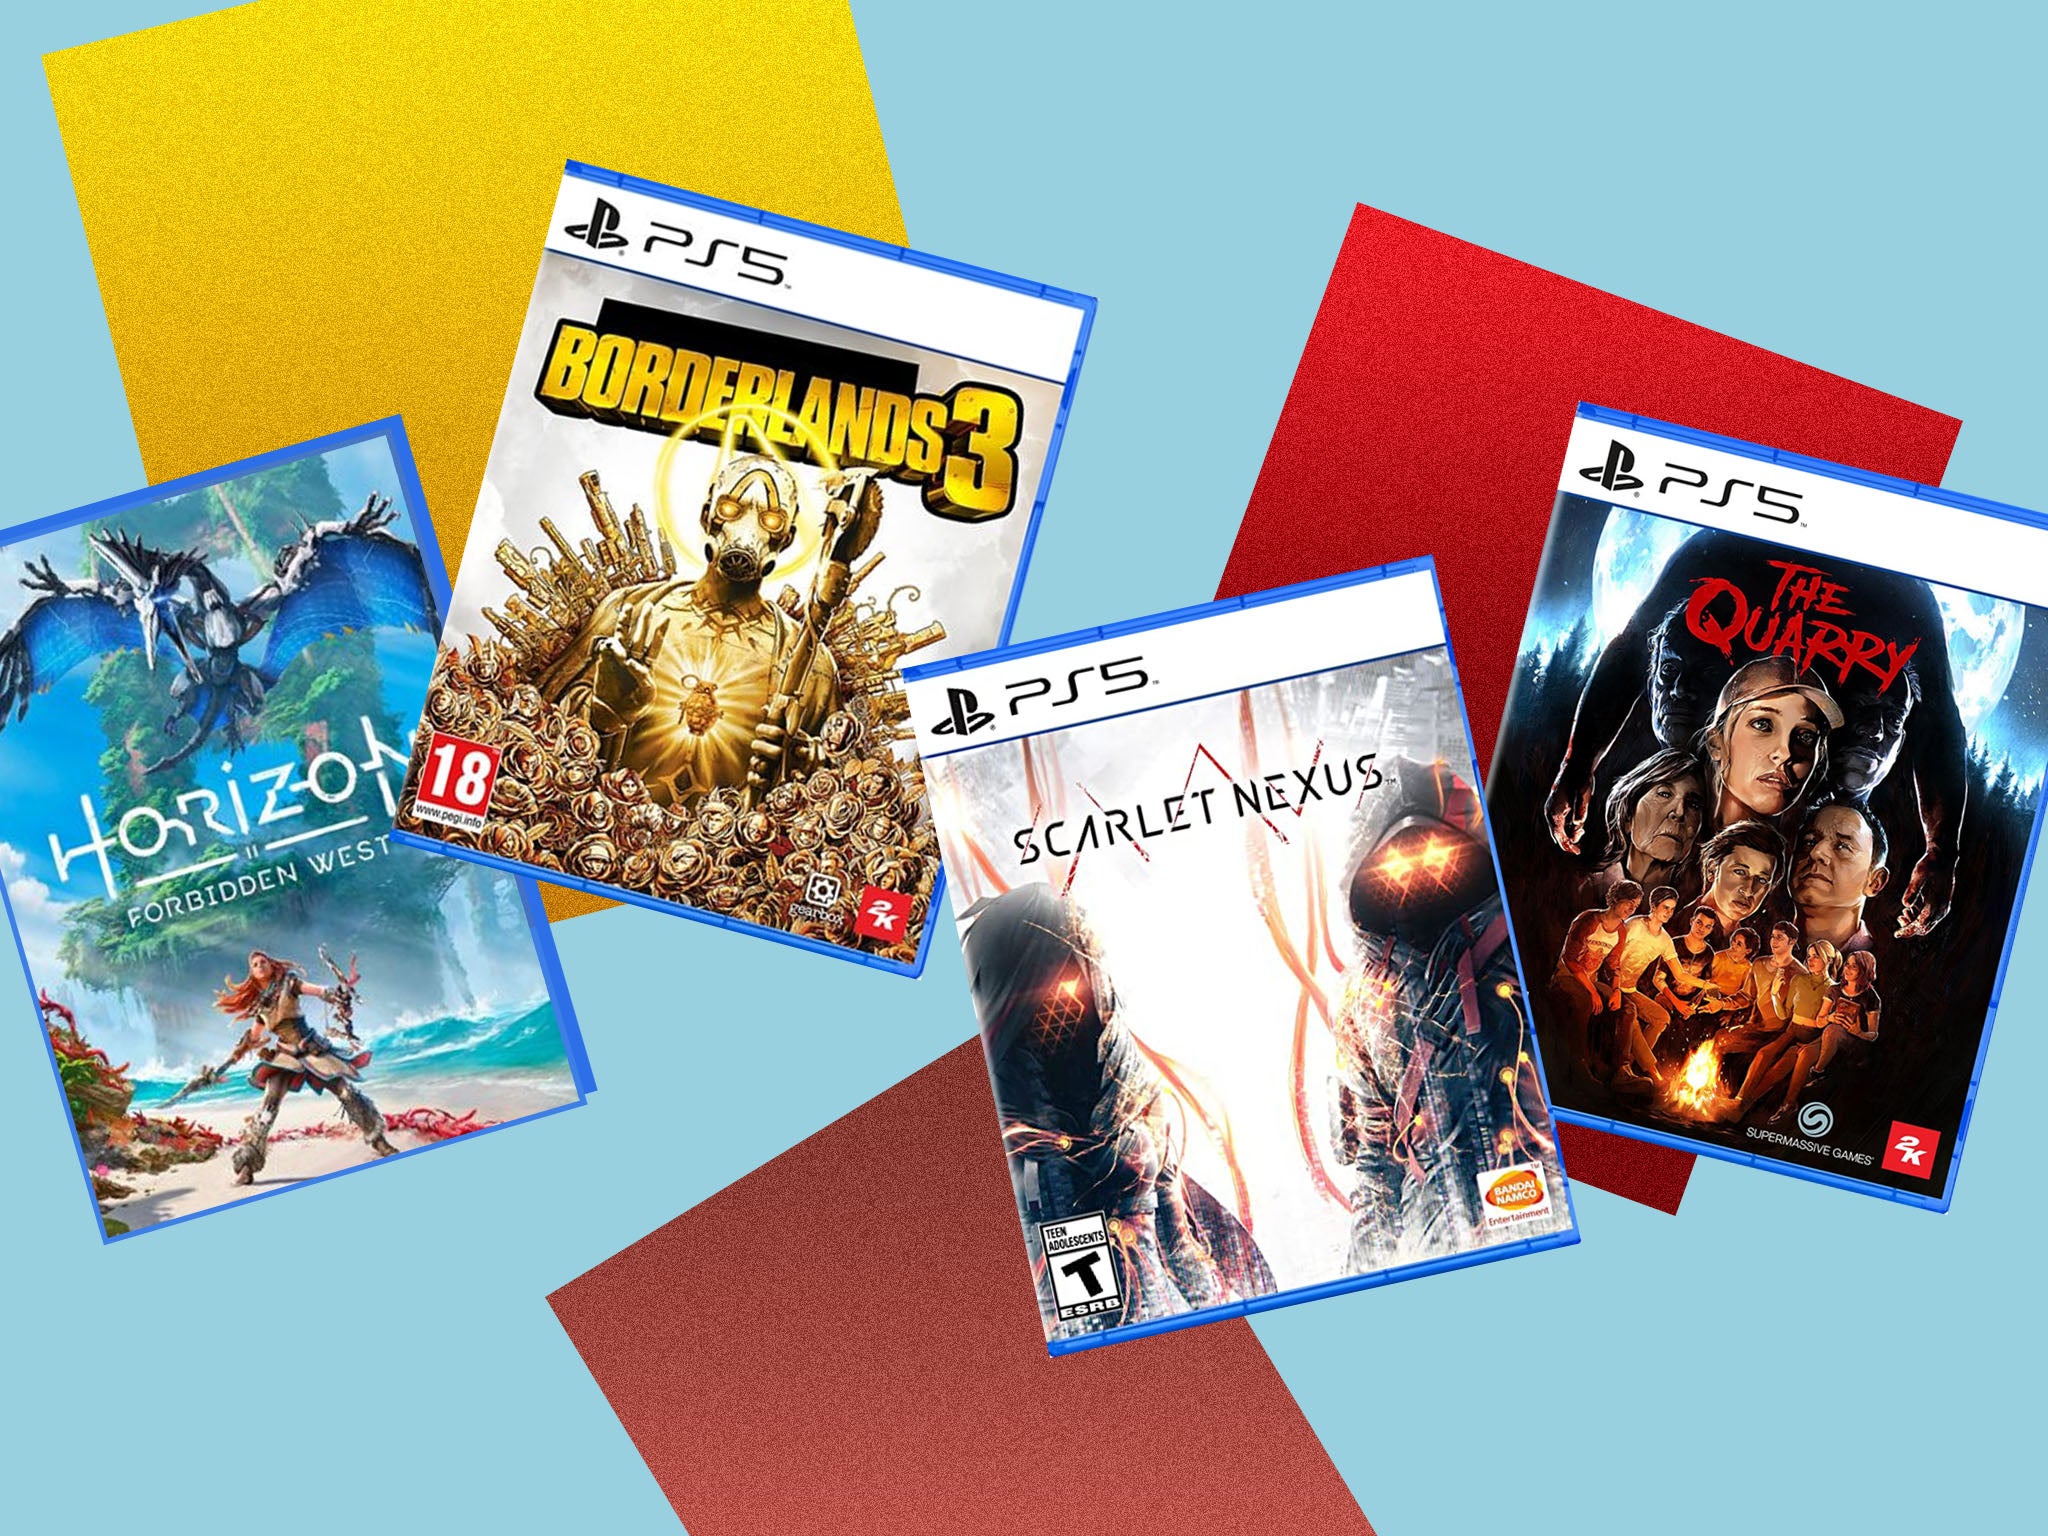 The games will be available via PS Plus from 21 February